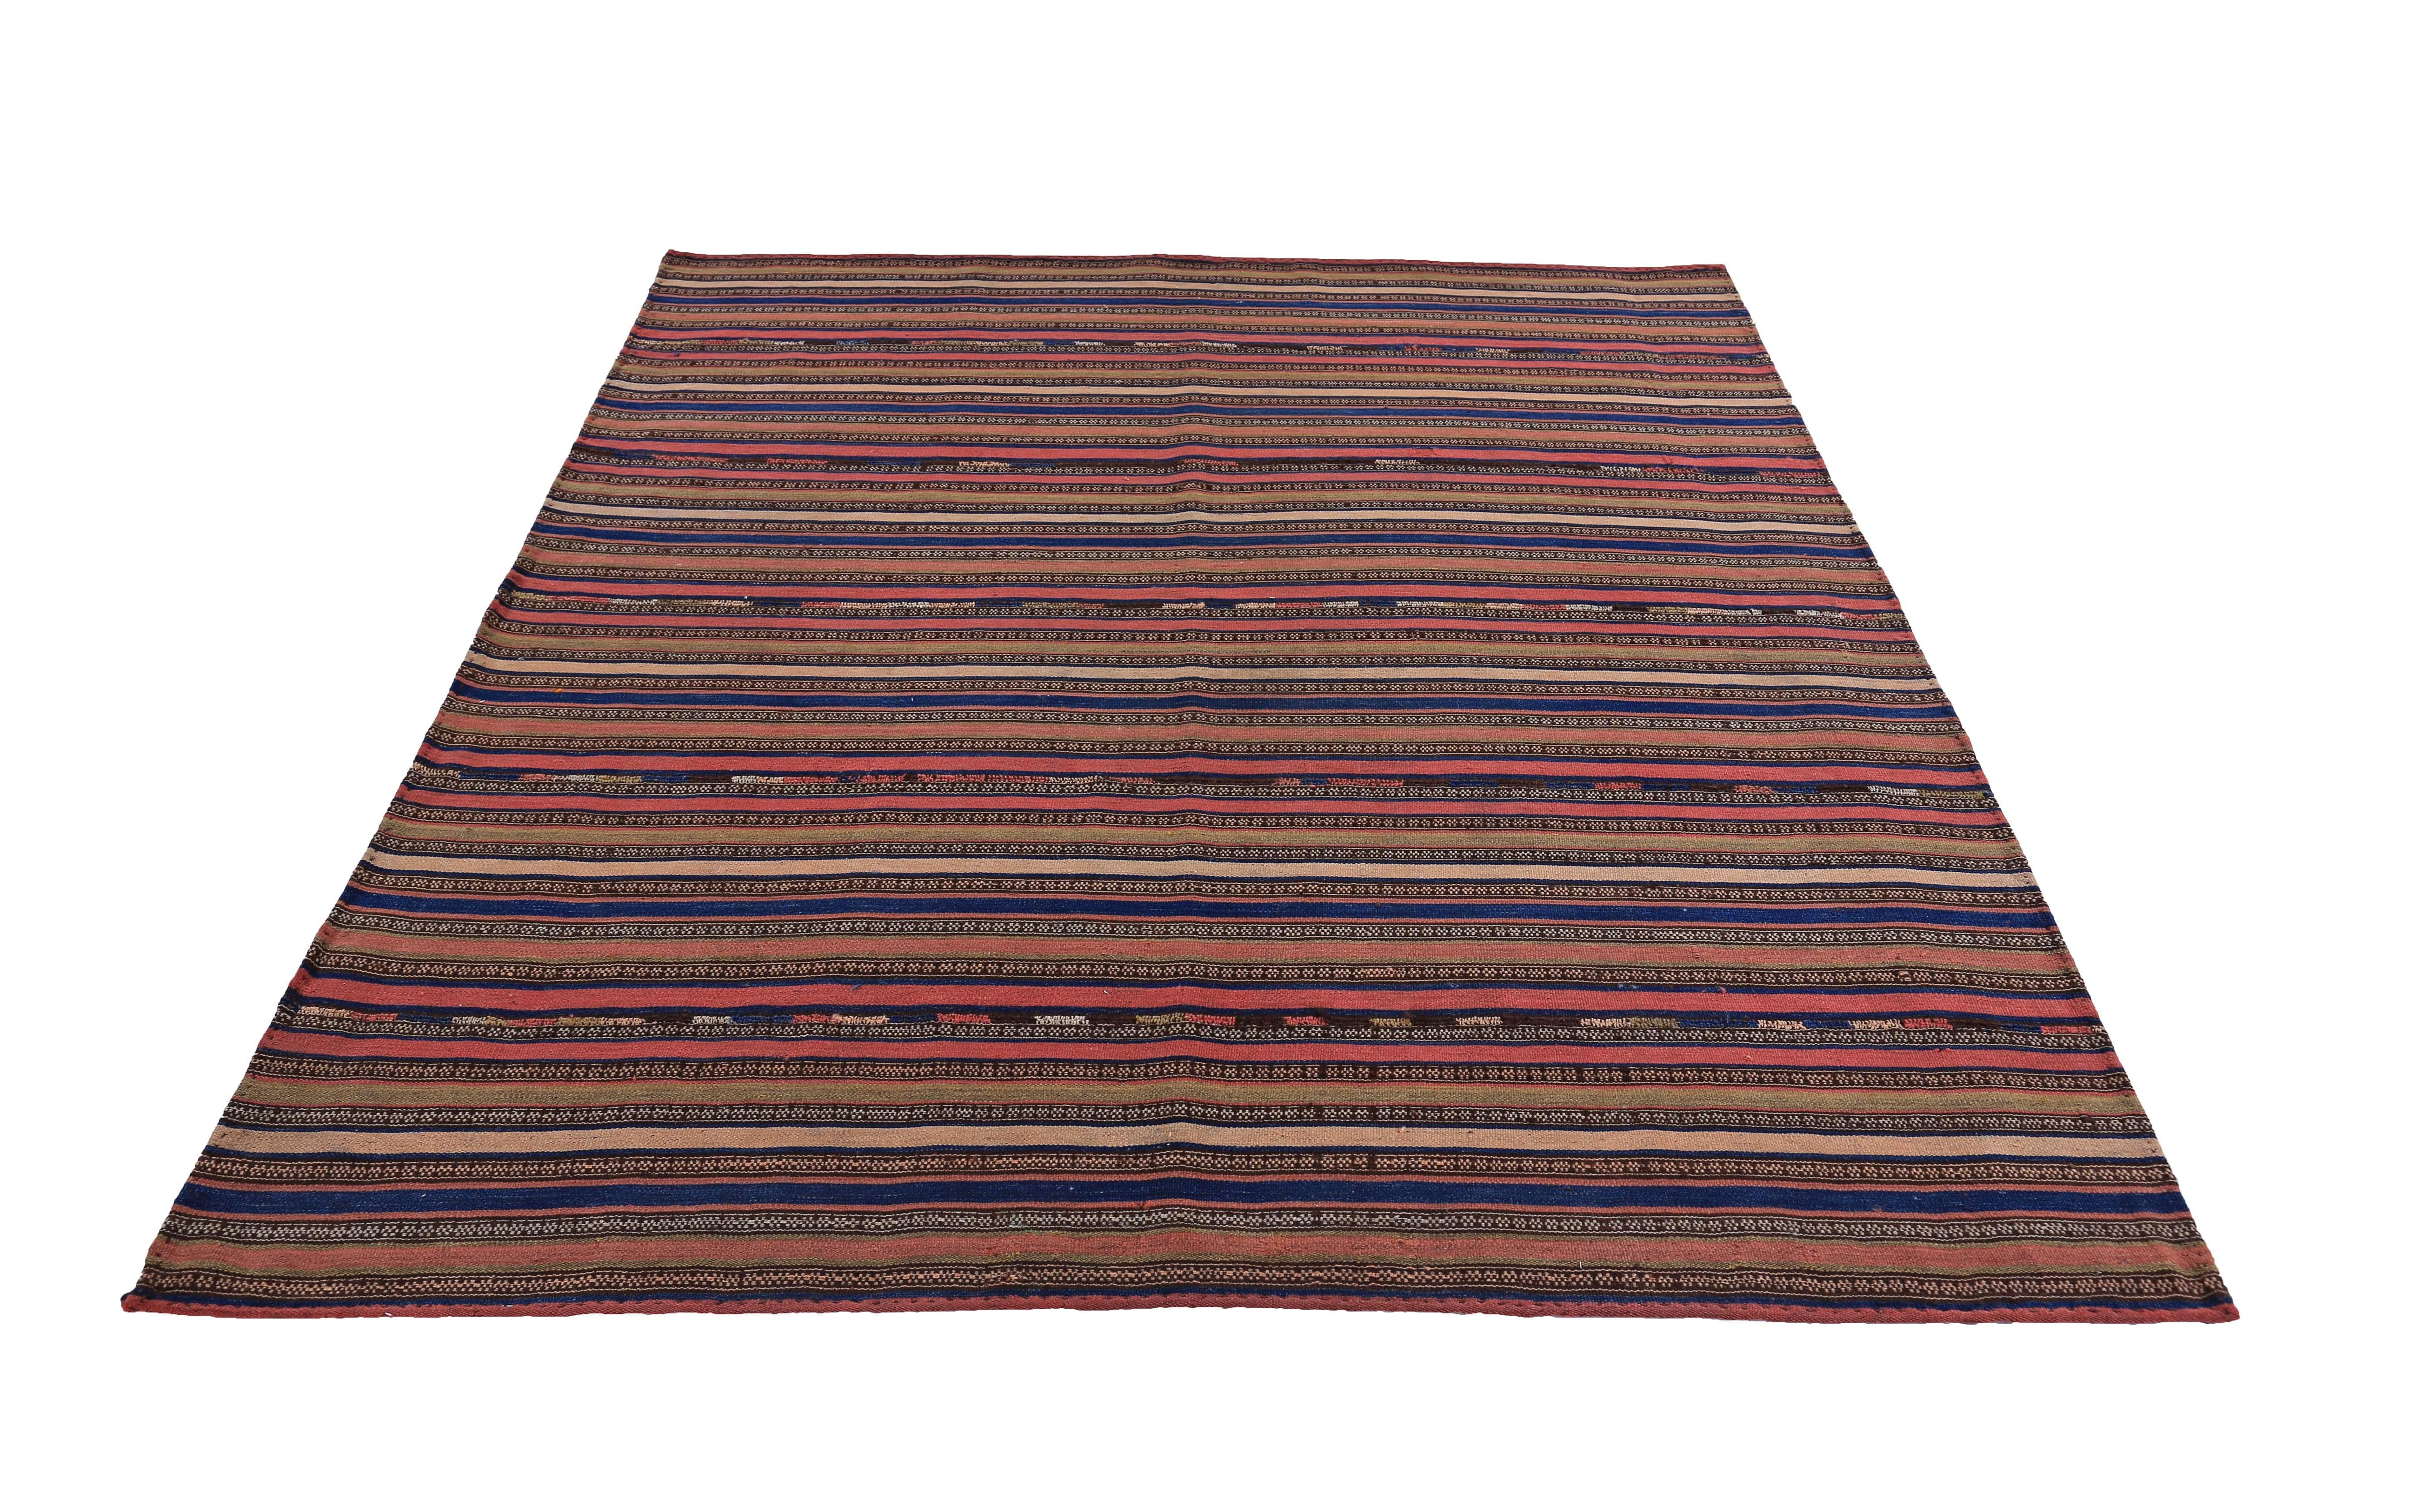 Modern Turkish rug handwoven from the finest sheep’s wool and colored with all-natural vegetable dyes that are safe for humans and pets. It’s a traditional Kilim flat-weave design featuring red, blue, brown and orange stripes. It’s a stunning piece